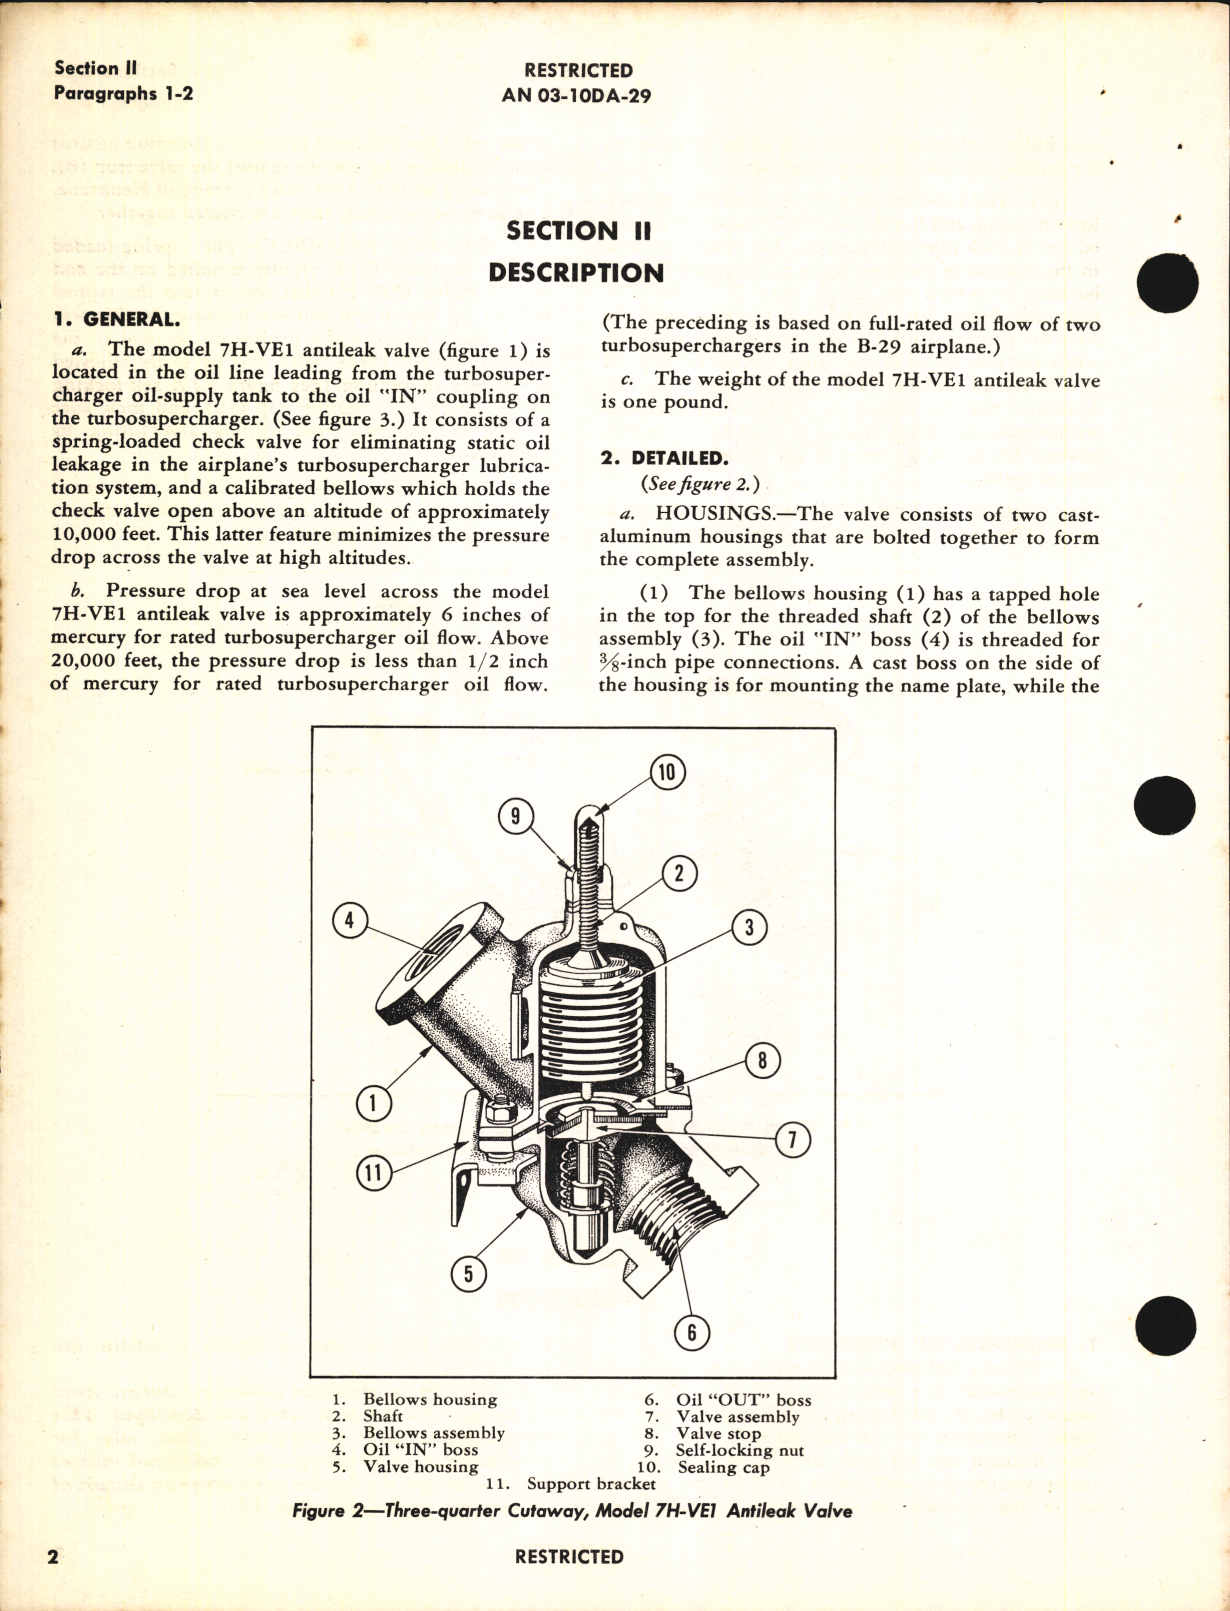 Sample page 6 from AirCorps Library document: Overhaul Instructions with Parts Catalog for Model 7H-VE1 Barometric Antileak Valve